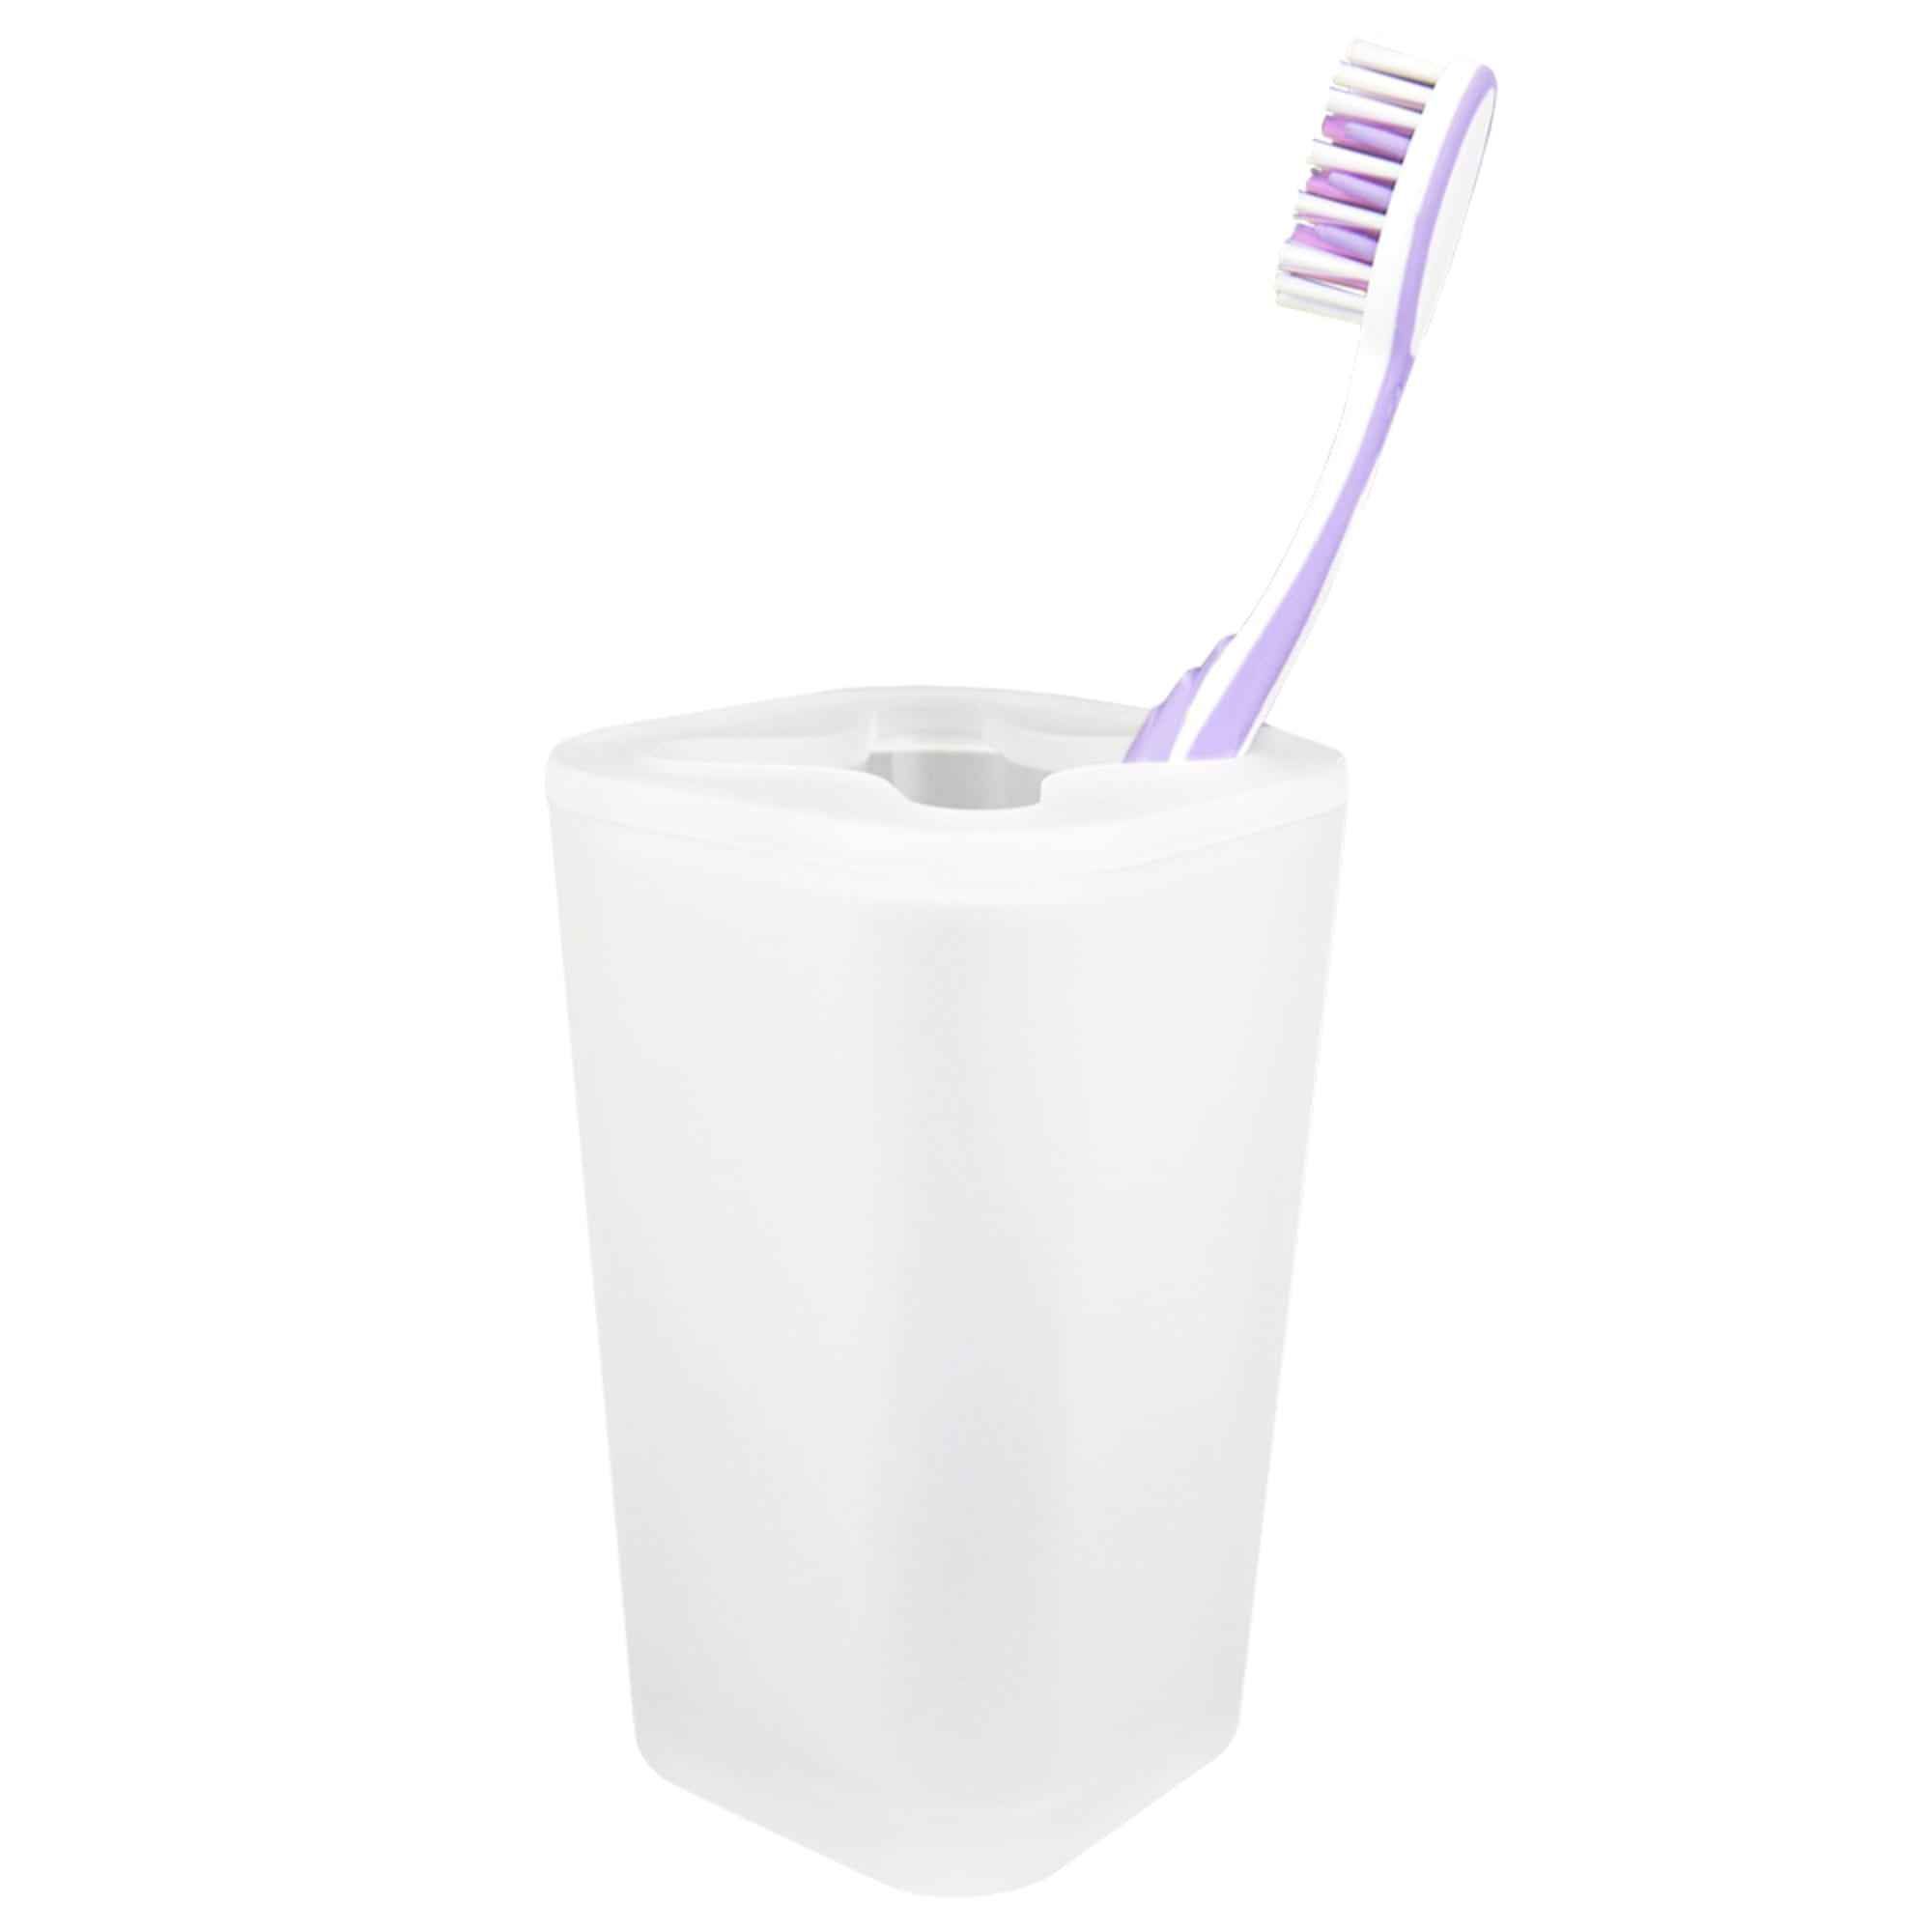 Home Basics Frosted Rubberized Plastic Toothbrush Holder $2.50 EACH, CASE PACK OF 12